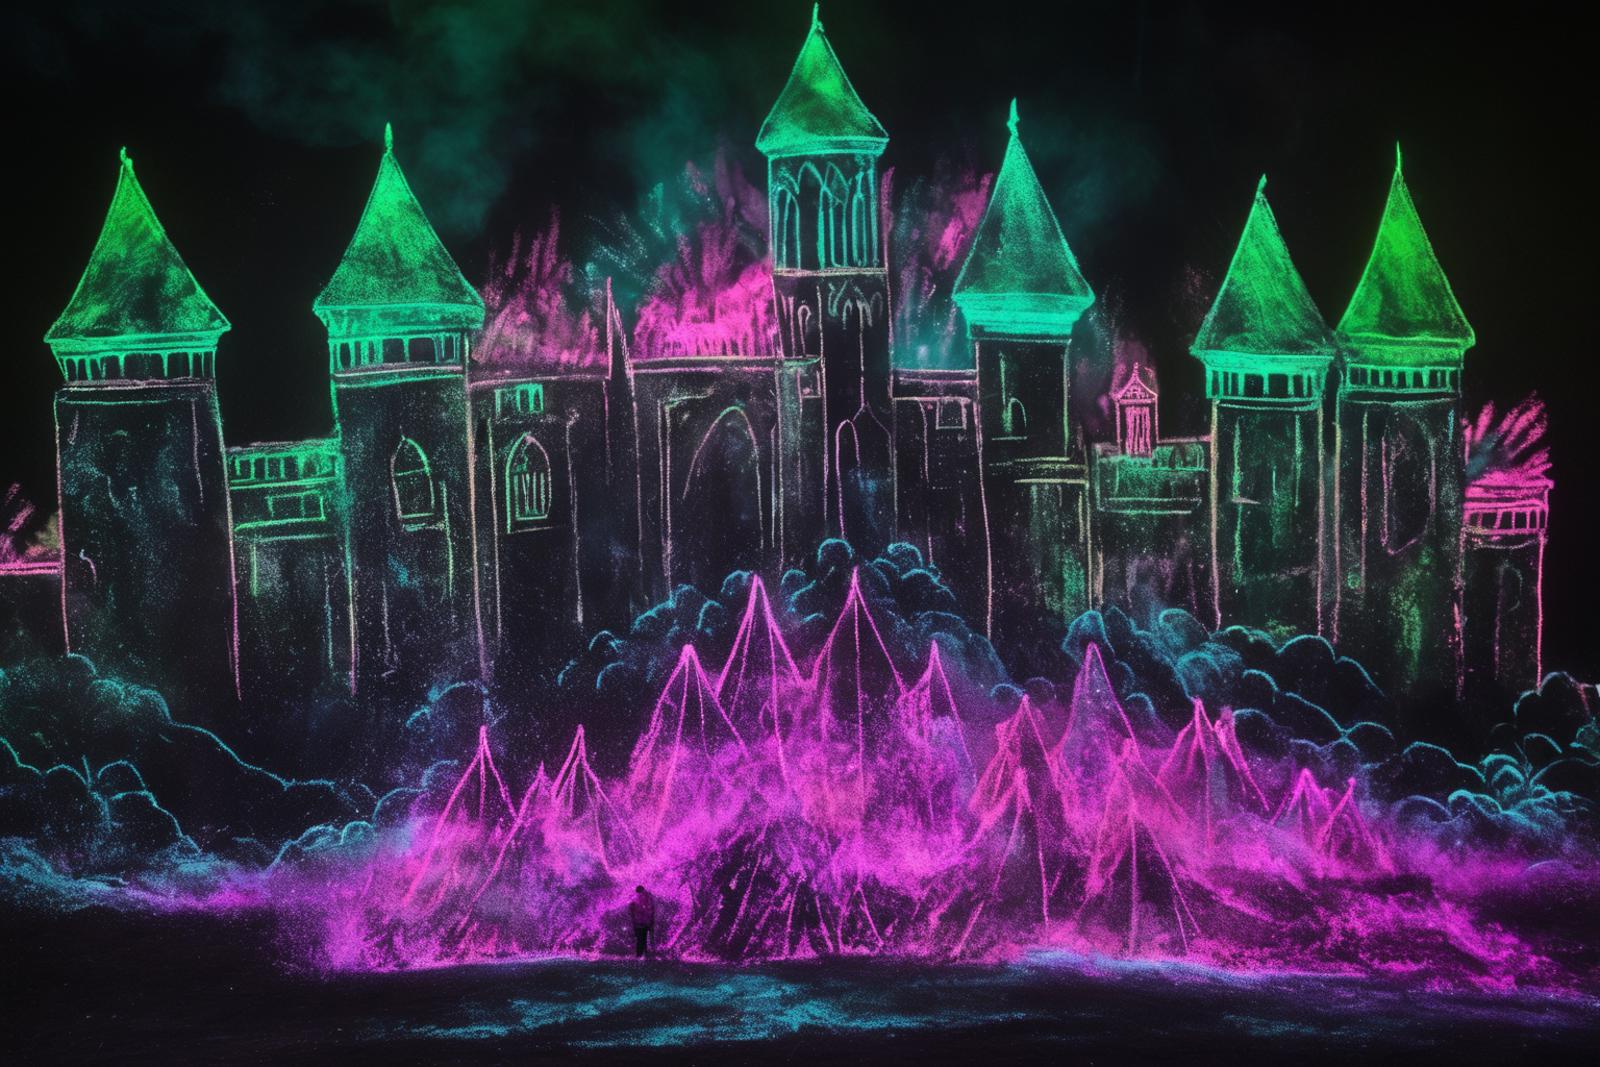 A glowing purple and green castle with an explosion of colorful lights.